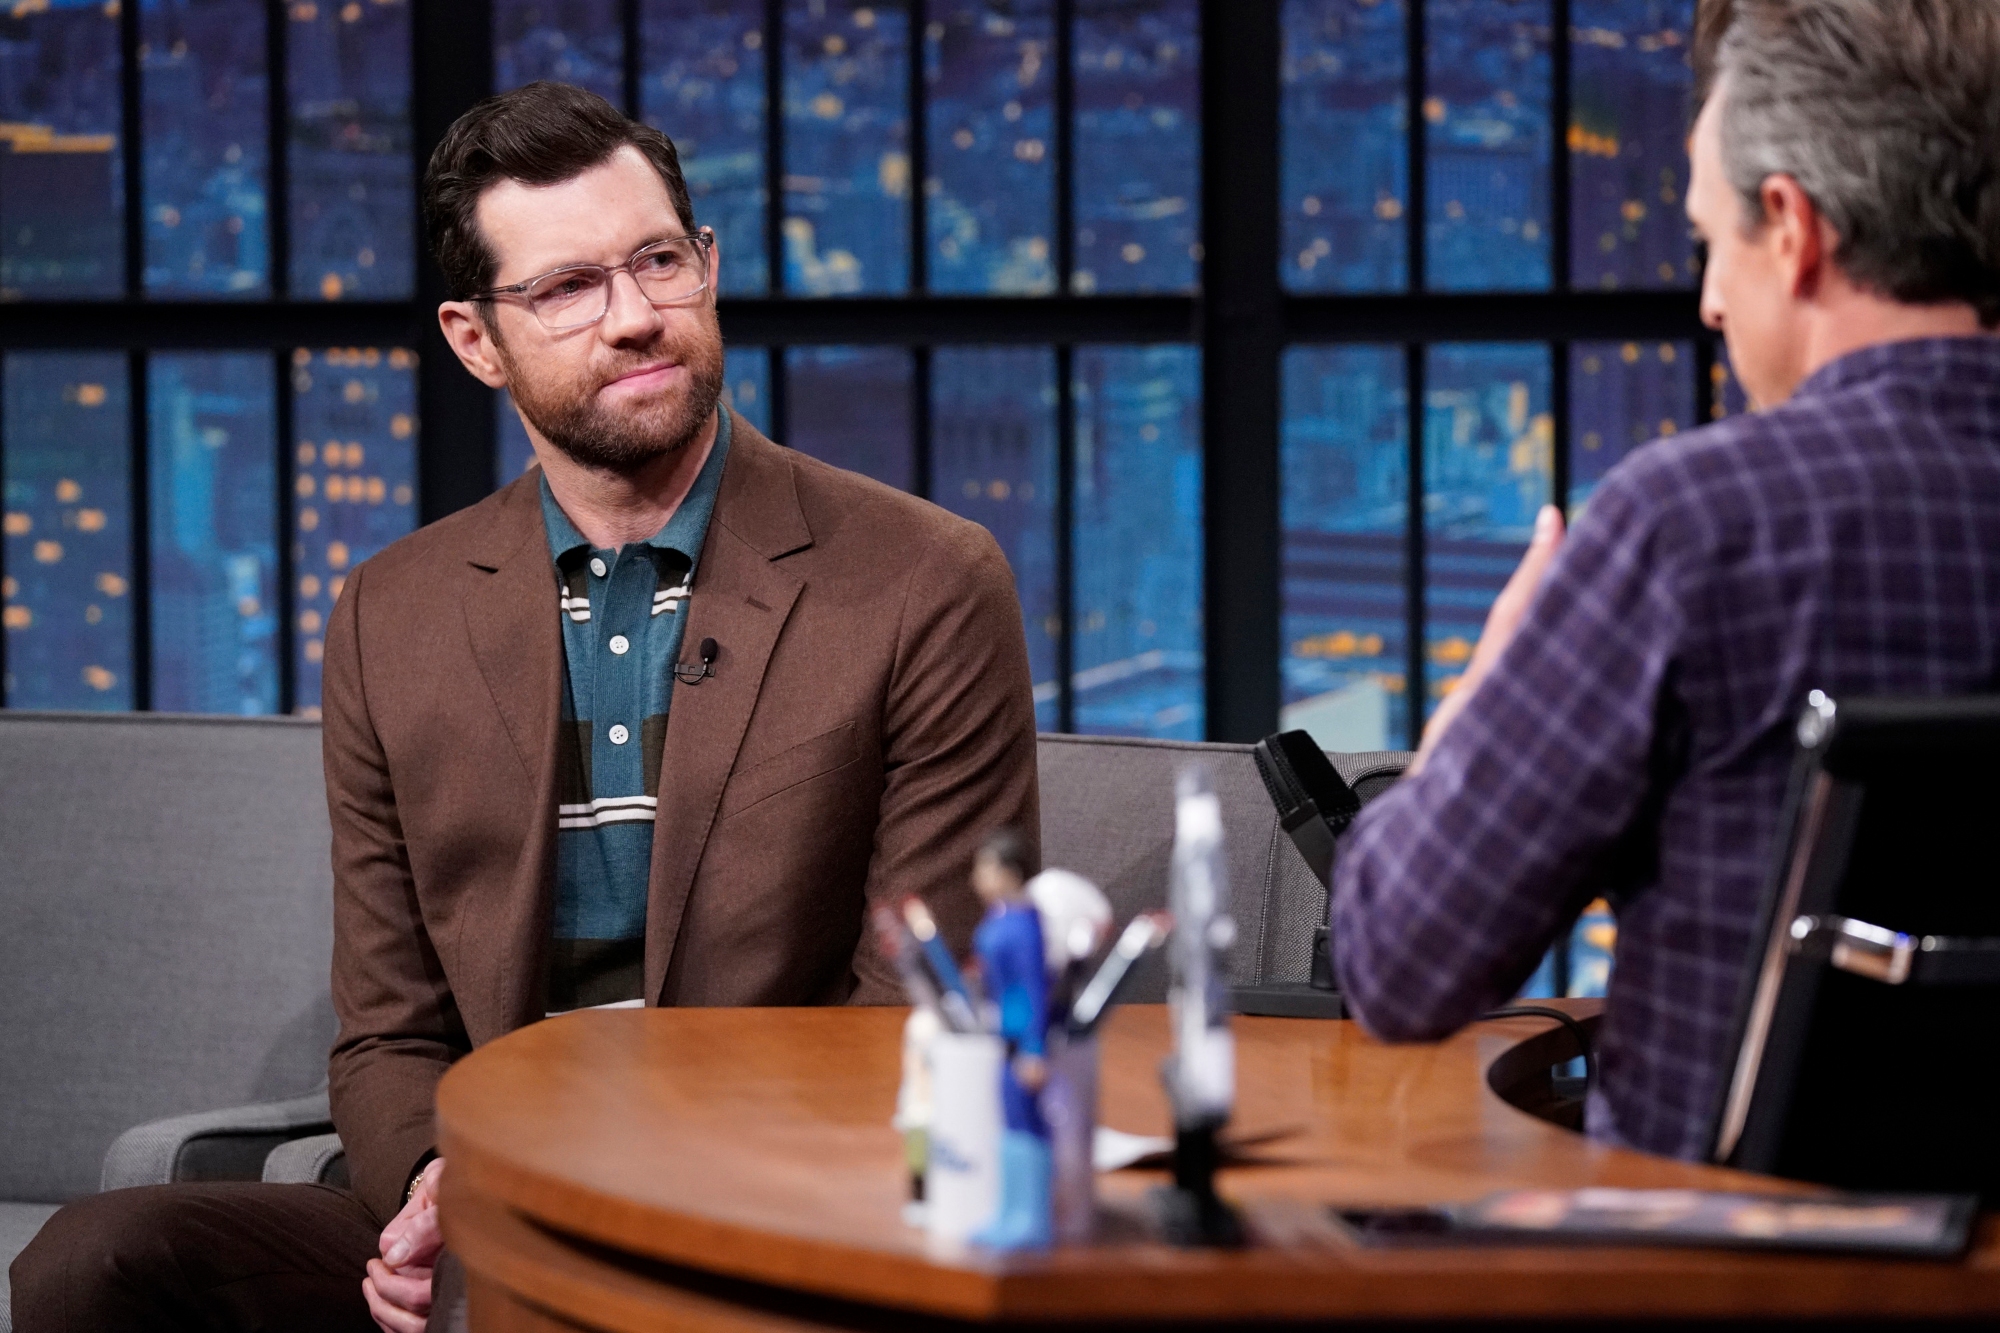 'Bros' actor Billy Eichner telling host Seth Meyers about Tinder bans. Eichner is wearing a brown suit jacket and glasses, looking at Meyers from the other side of the desk. Meyers is shown from the back wearing a plaid shirt.